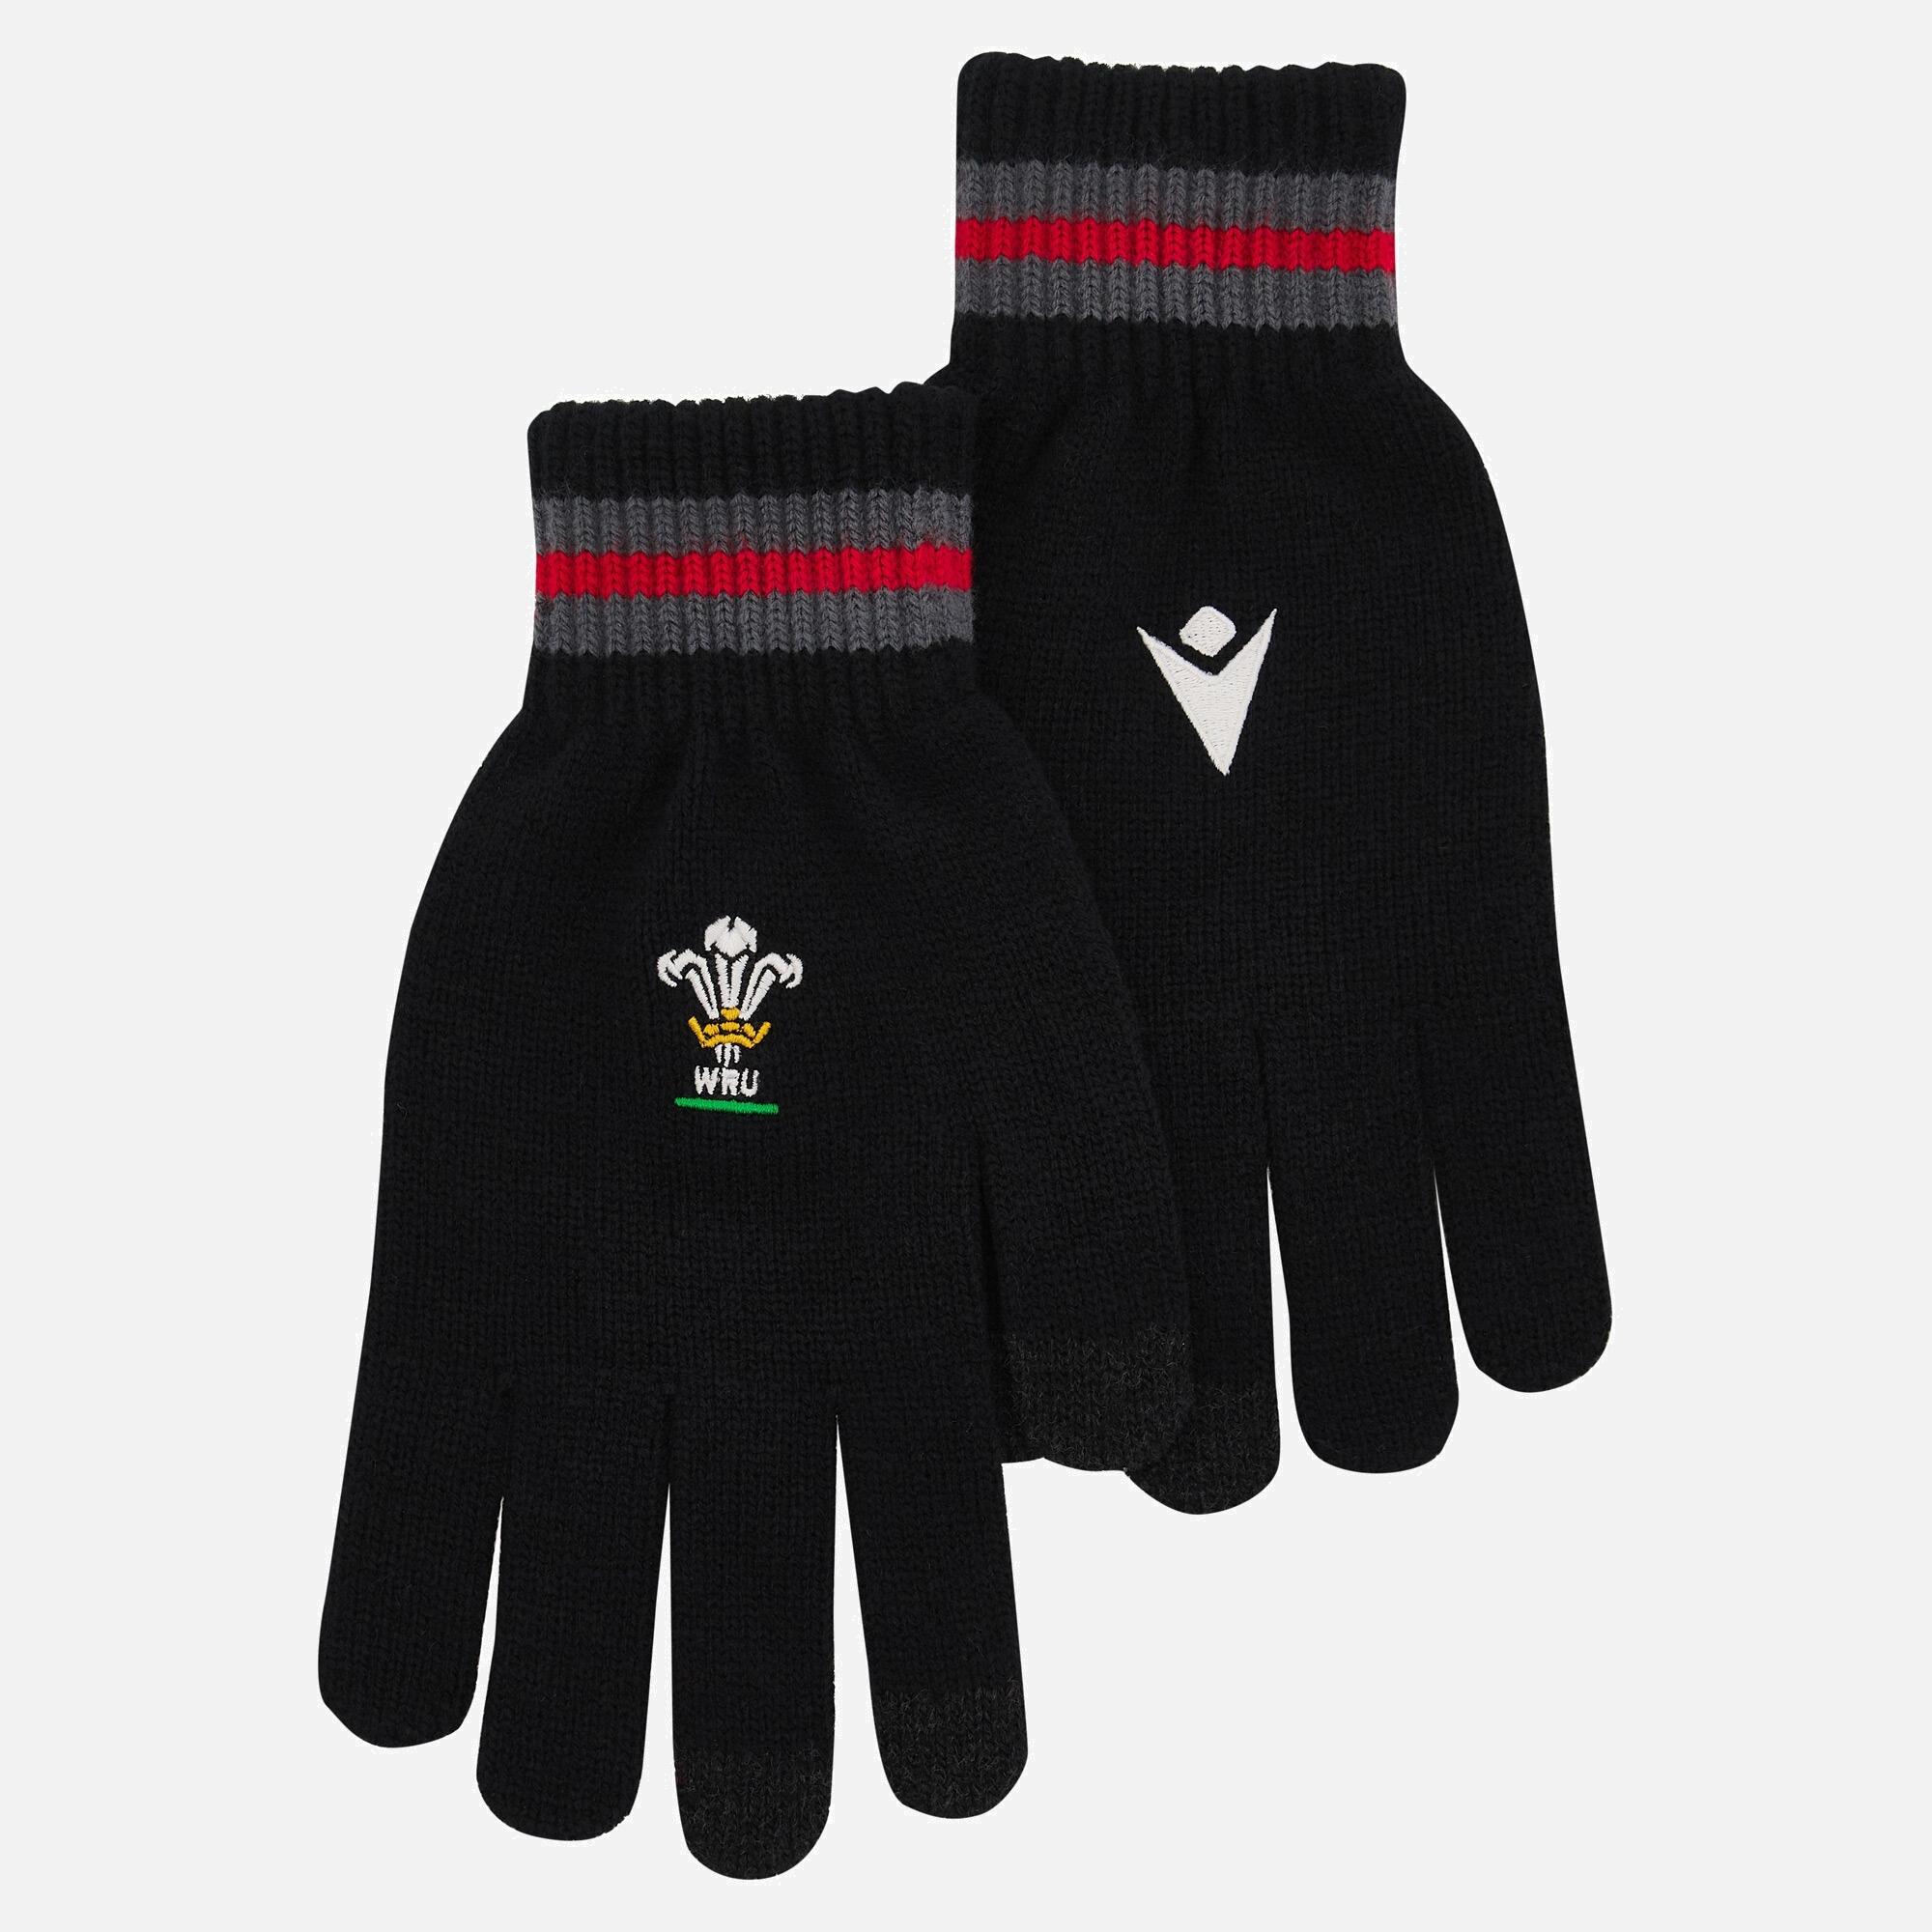 Macron Wales Warm Grip Gloves Smartphone Touch 1/3